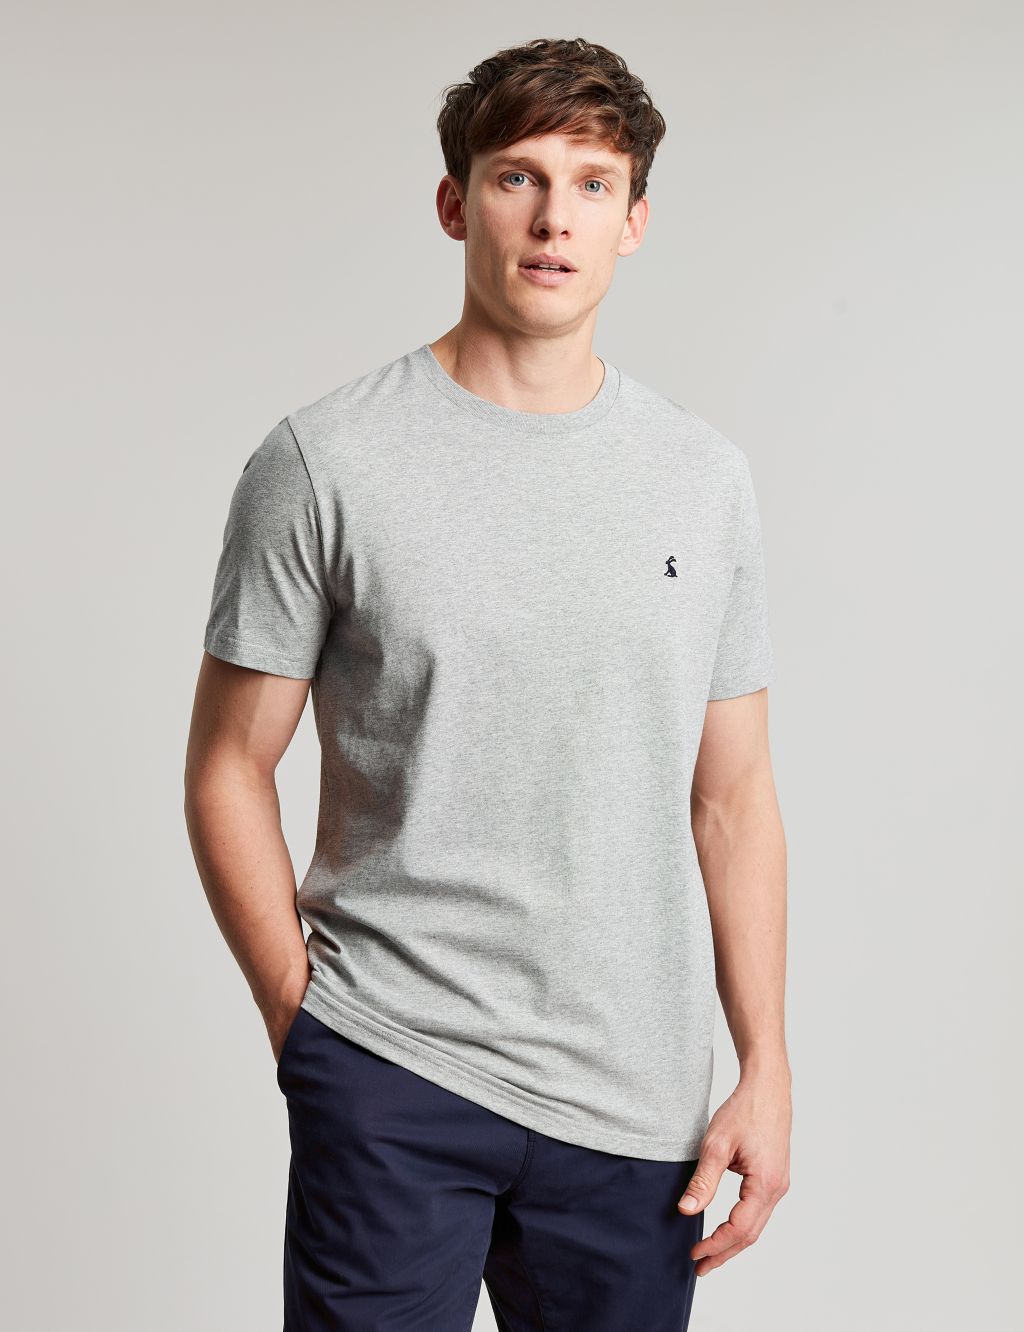 Joules T-Shirts | M&S